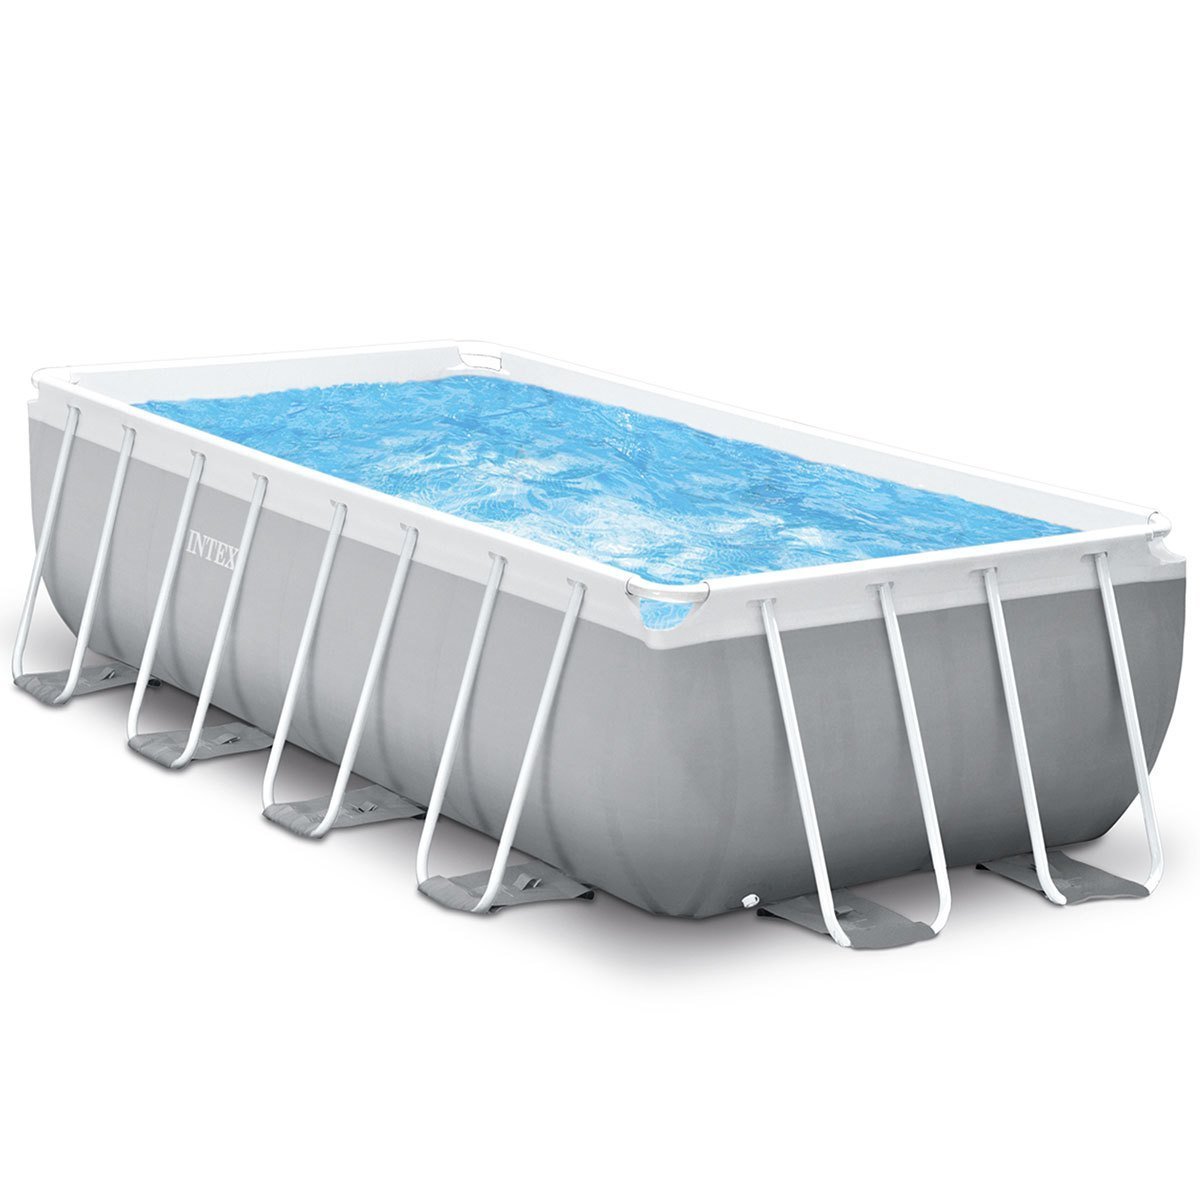 Intex 13ft 1.5" (4m) Rectangular Prism Frame Pool with Filter Pump and Ladder - Signature Retail Stores